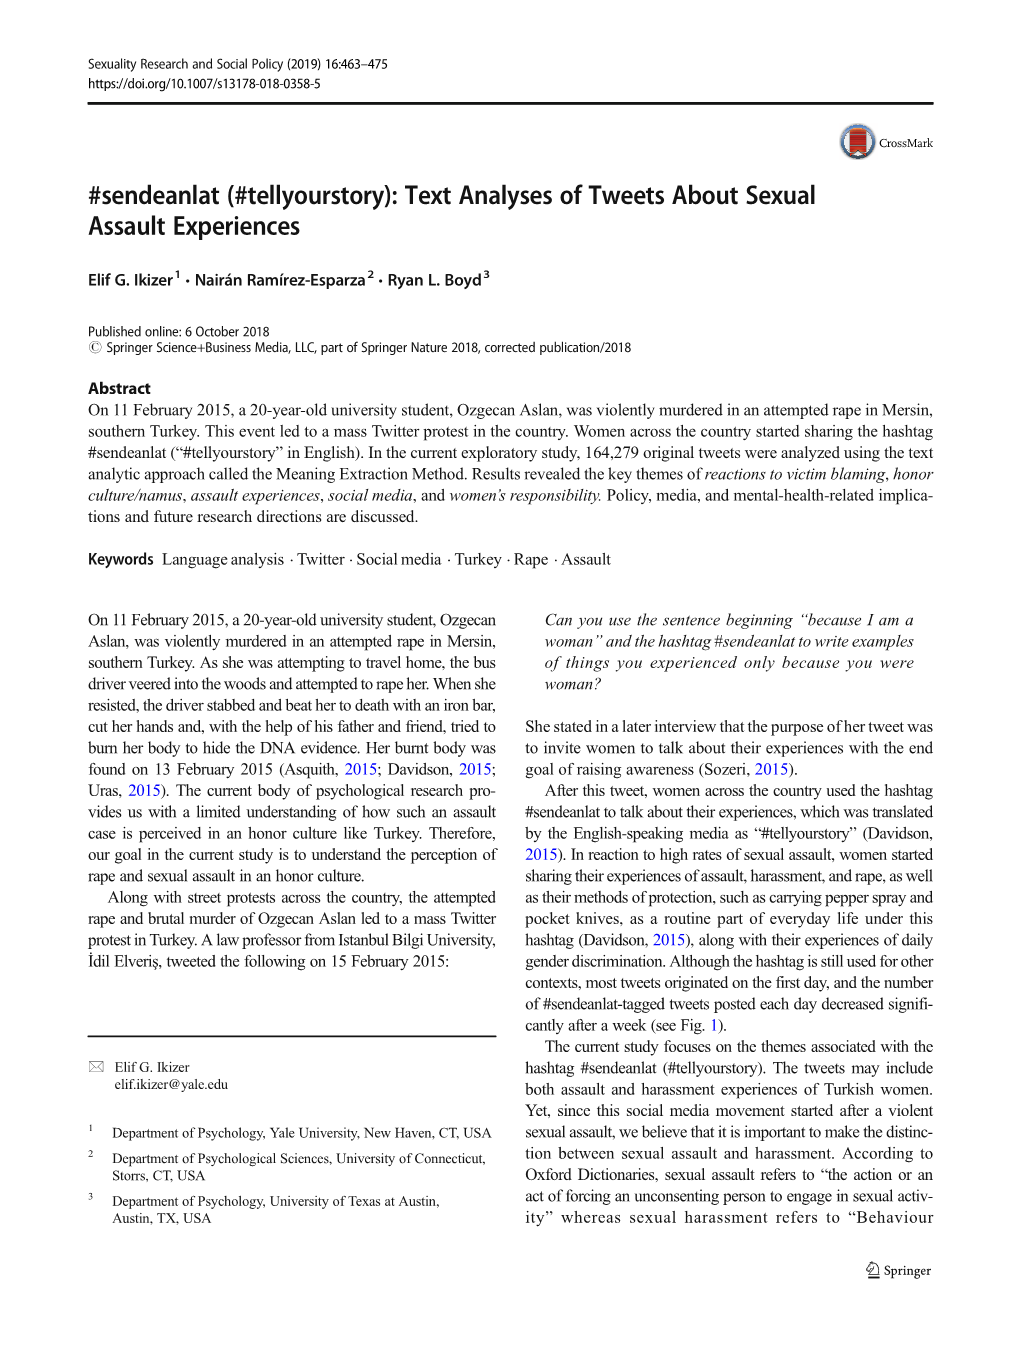 Sendeanlat (#Tellyourstory): Text Analyses of Tweets About Sexual Assault Experiences